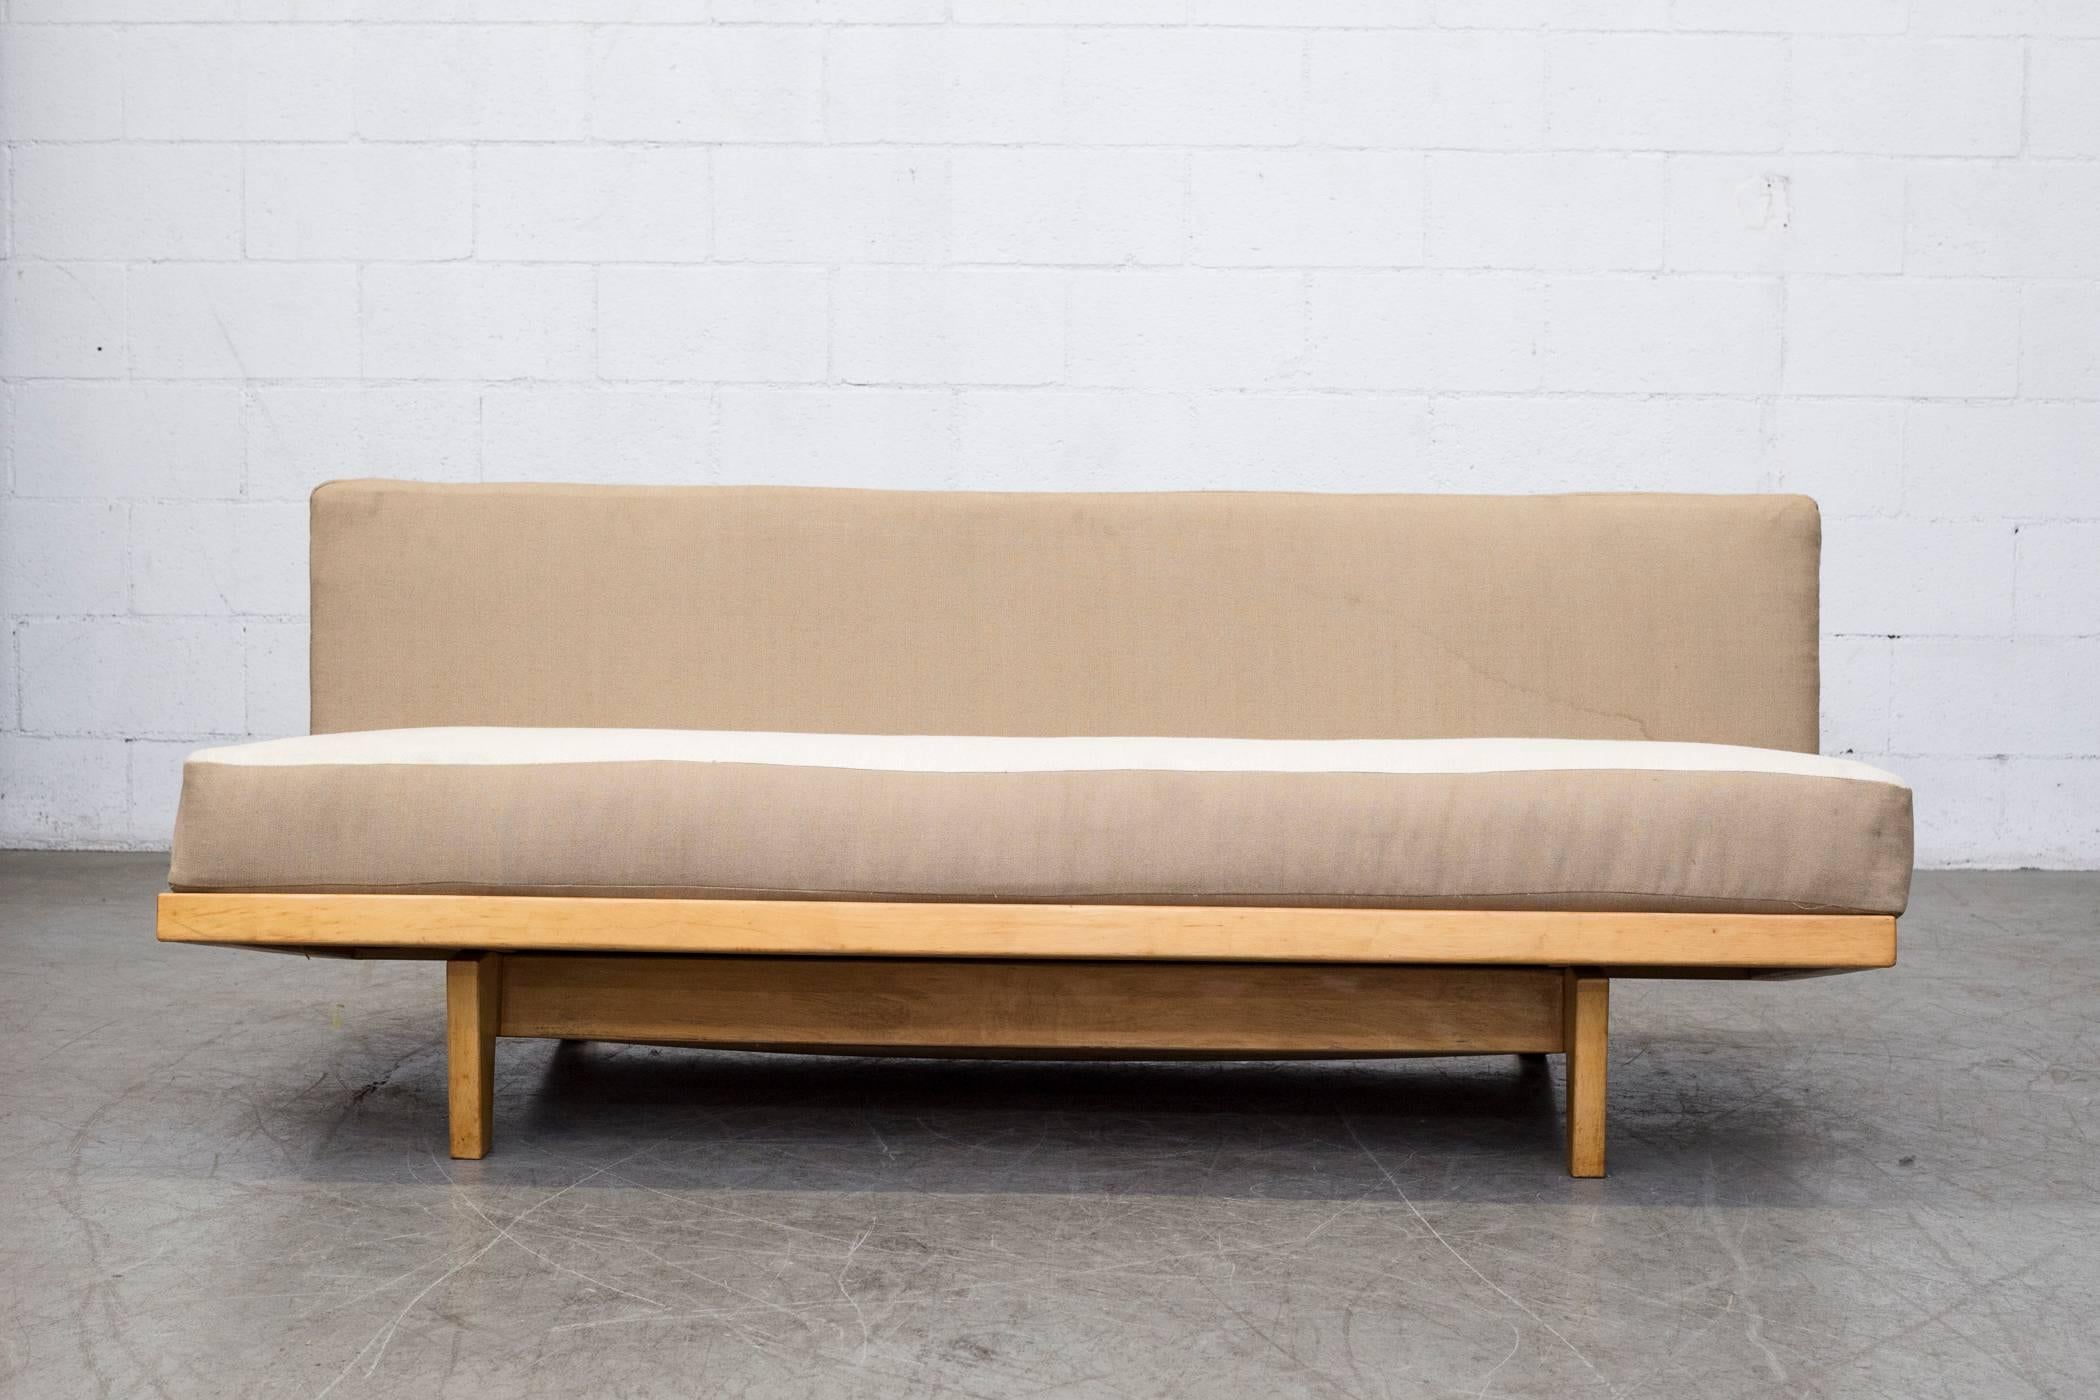 Stunning original sit and sleep model MB09 couch with hidden blanket storage. Birchwood with the original two-tone webbing. Designed by Dirk van Sliedregt in 1951 for UMS Pastoe Holland. Newly Upholstered two-tone upholstery with slight water stain